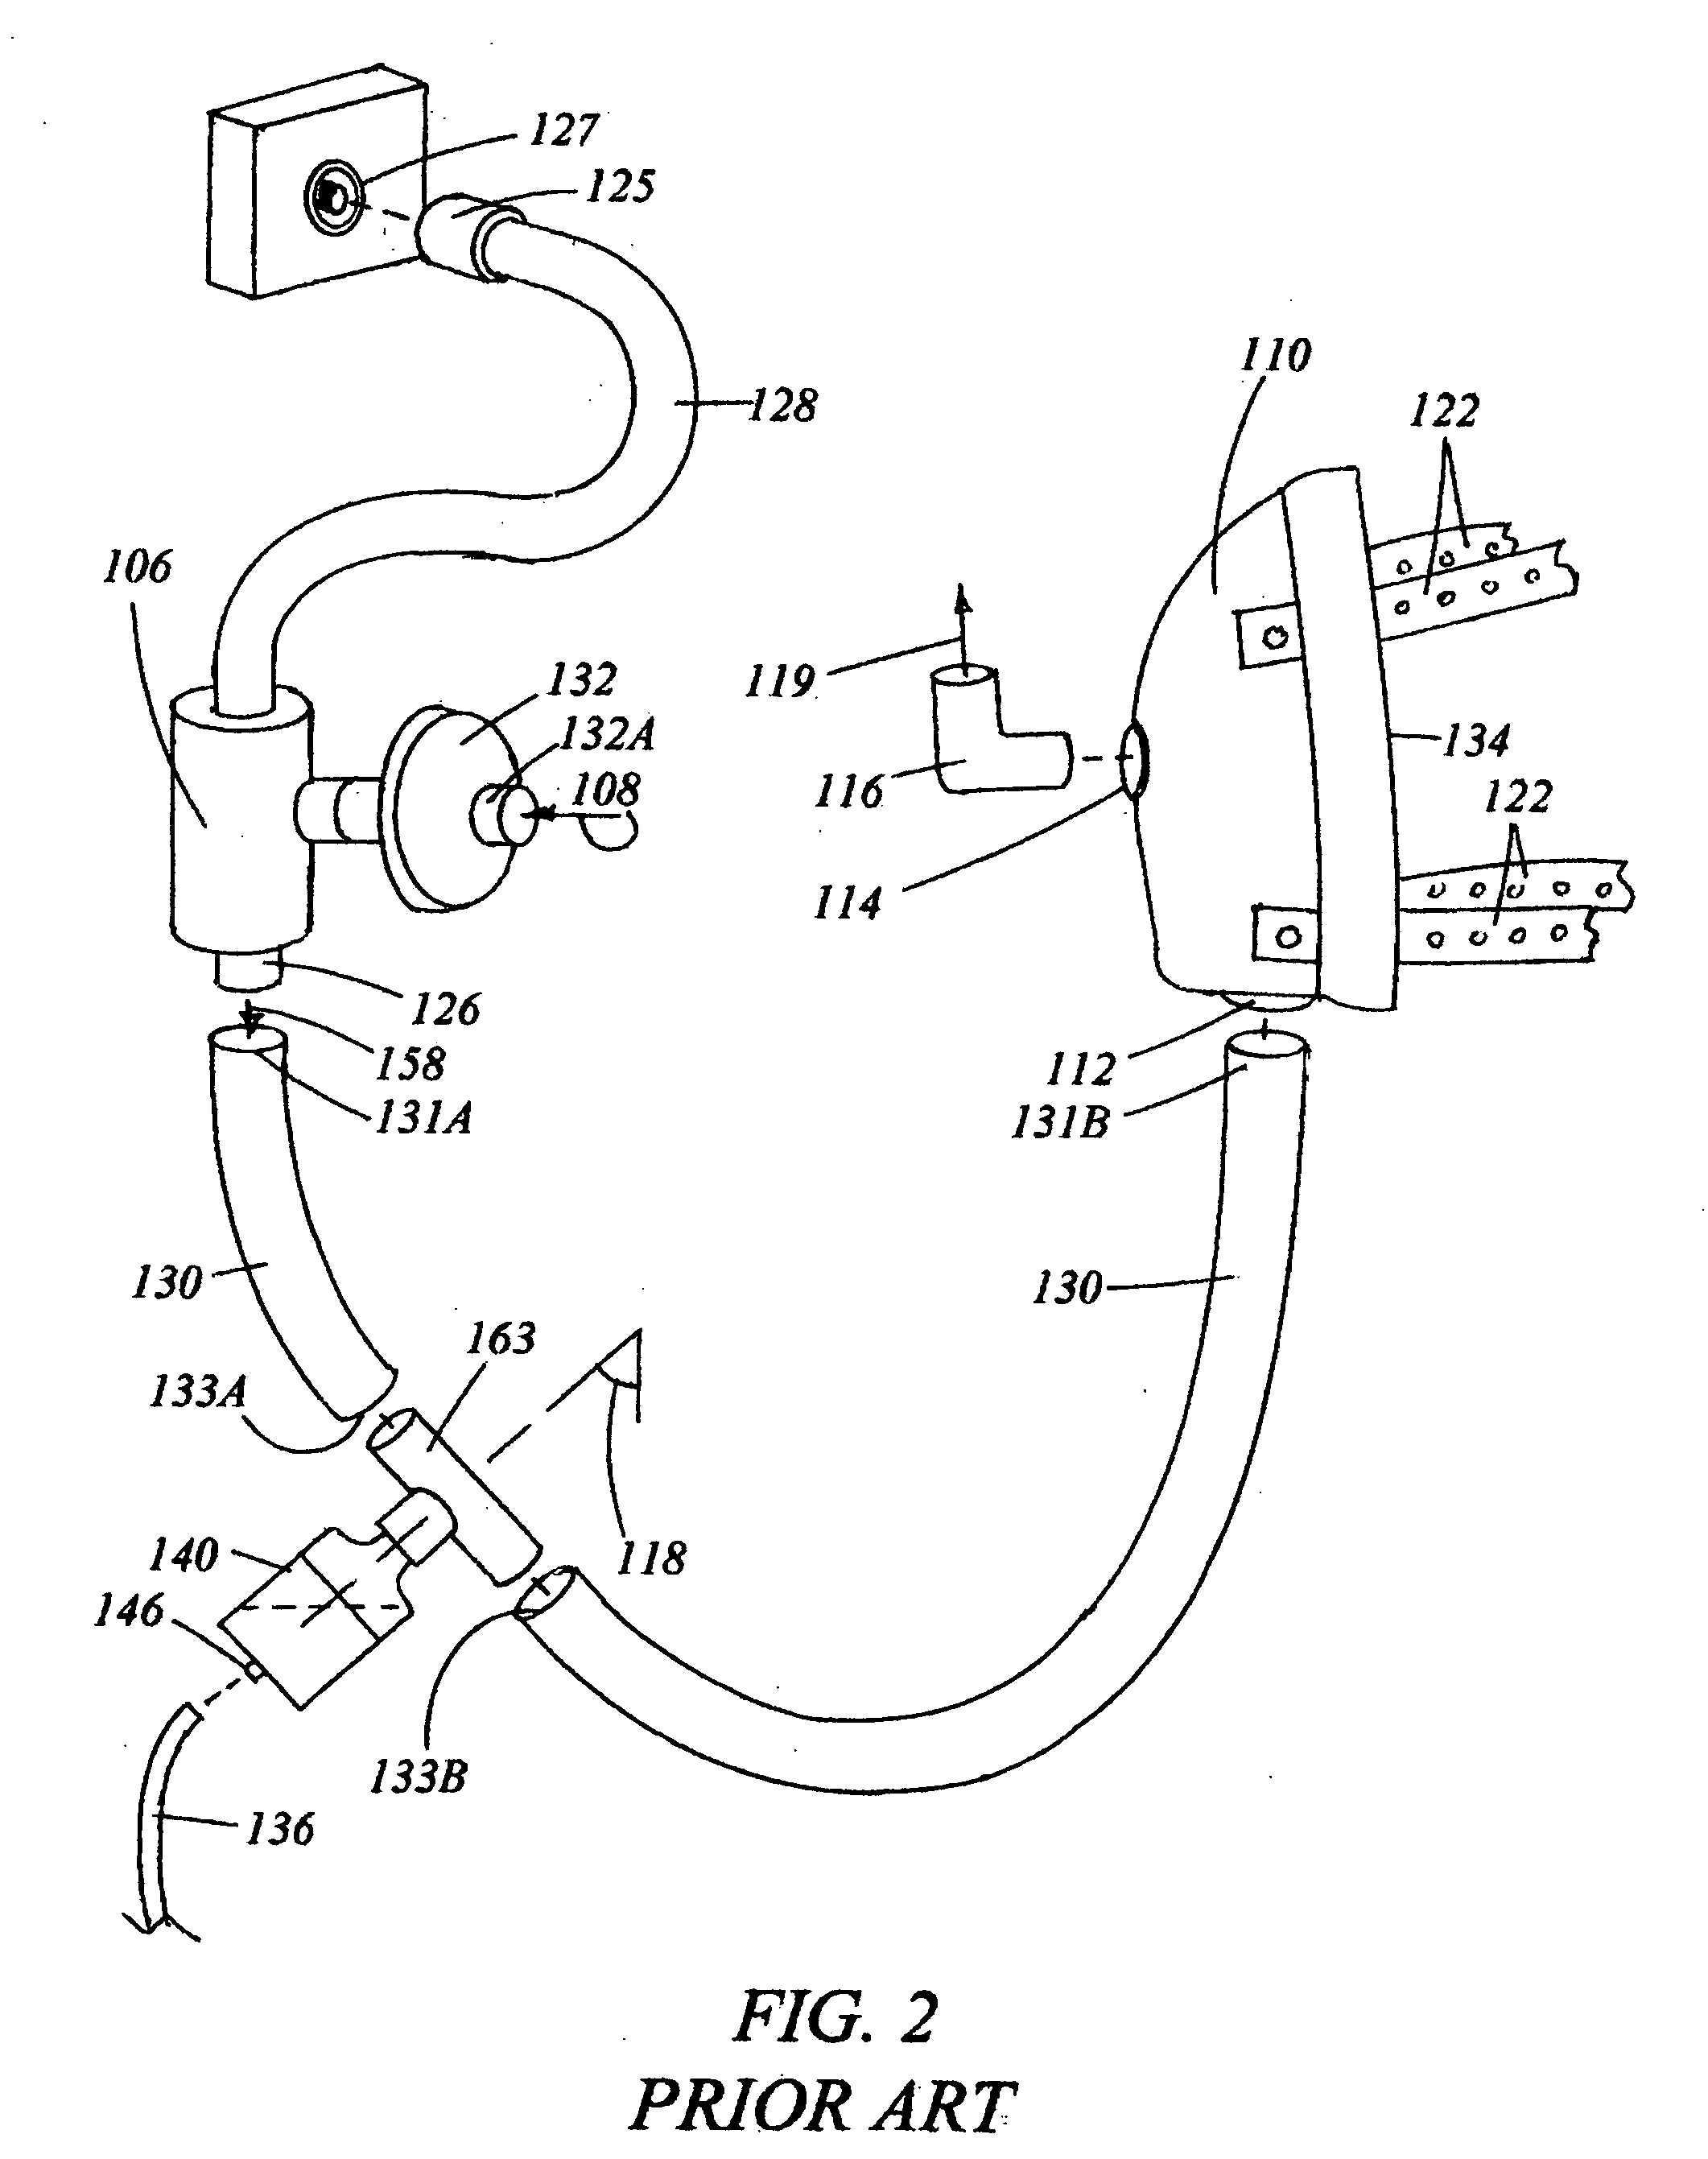 Medication delivery device and method